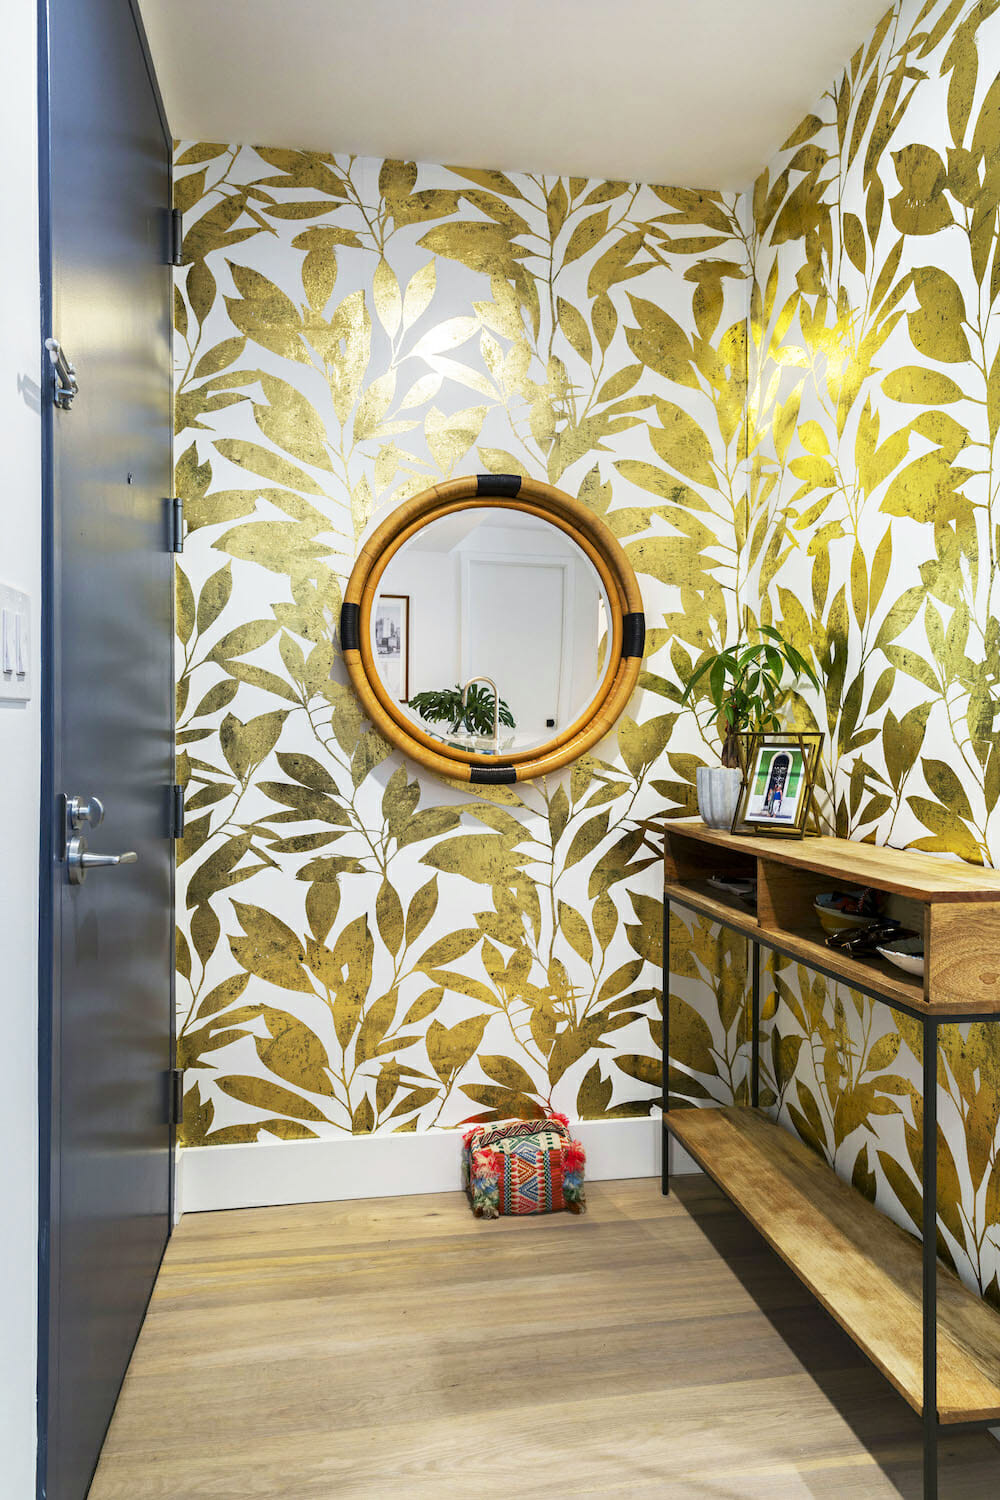 wallpaper decor in gold accents large fern pattern entryway